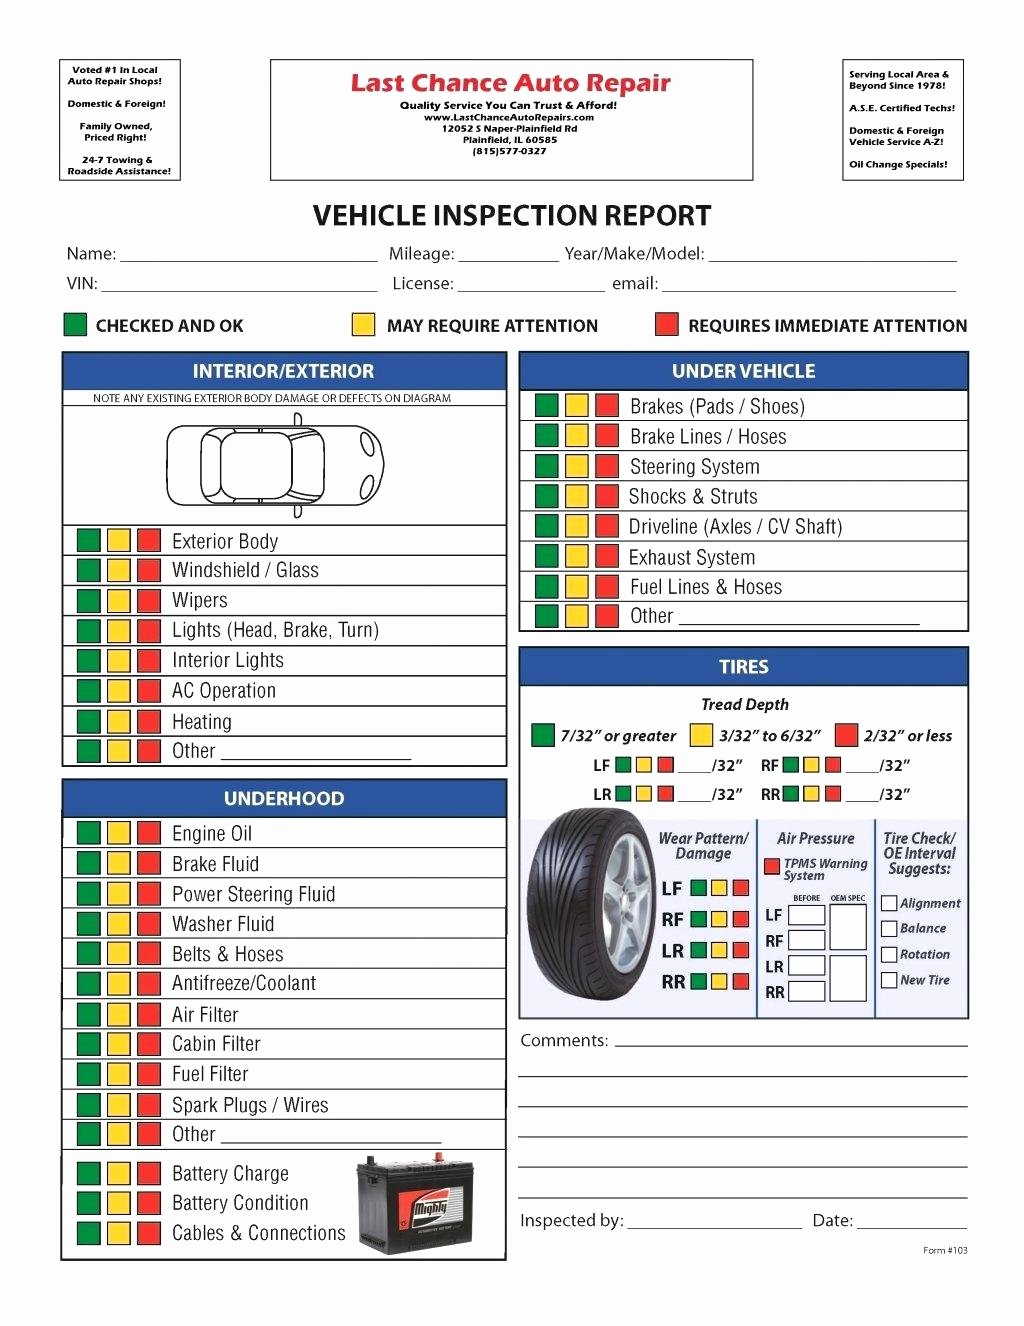 Vehicle Condition Report Template Inspirational Vehicle Condition Report form Template